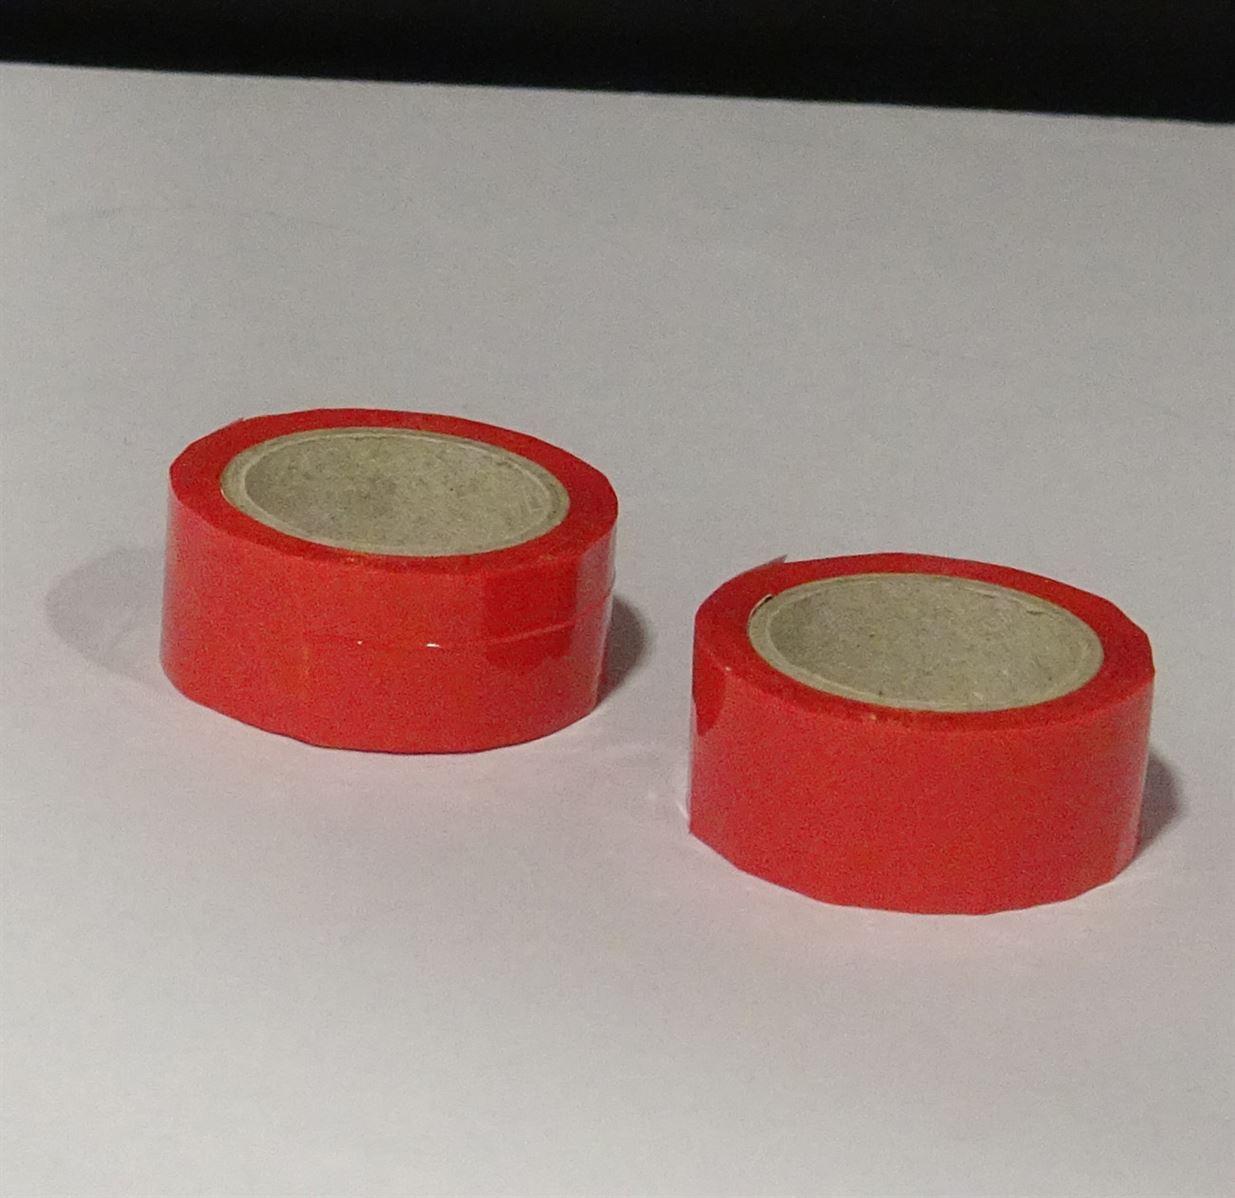 2 x RC Plane Glider SMALL red Wing Repair & Cover Tape Strength Colour EU Stock